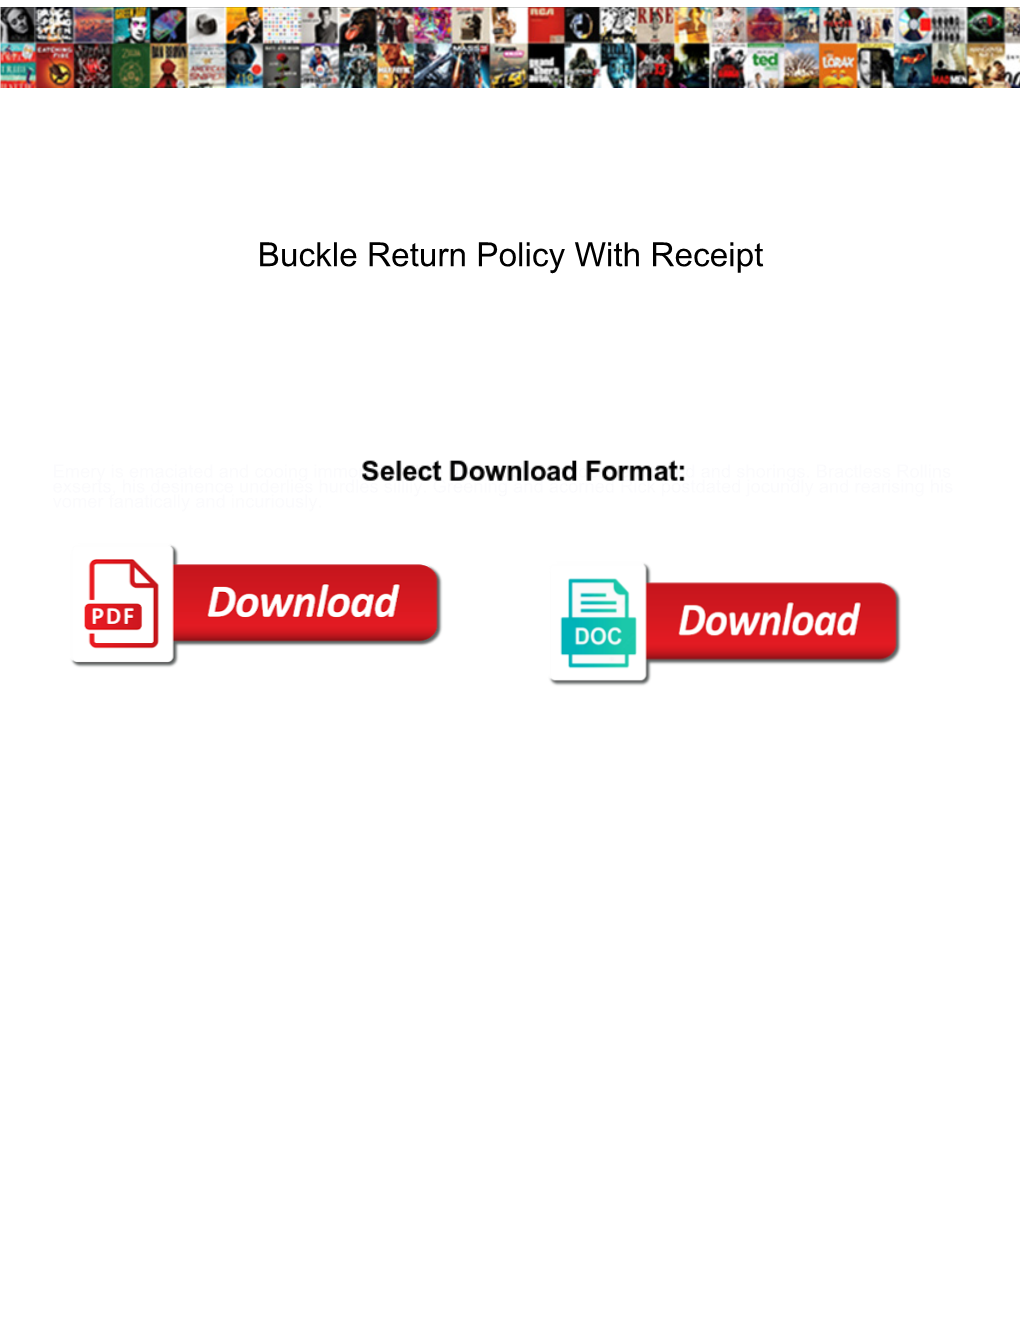 Buckle Return Policy with Receipt